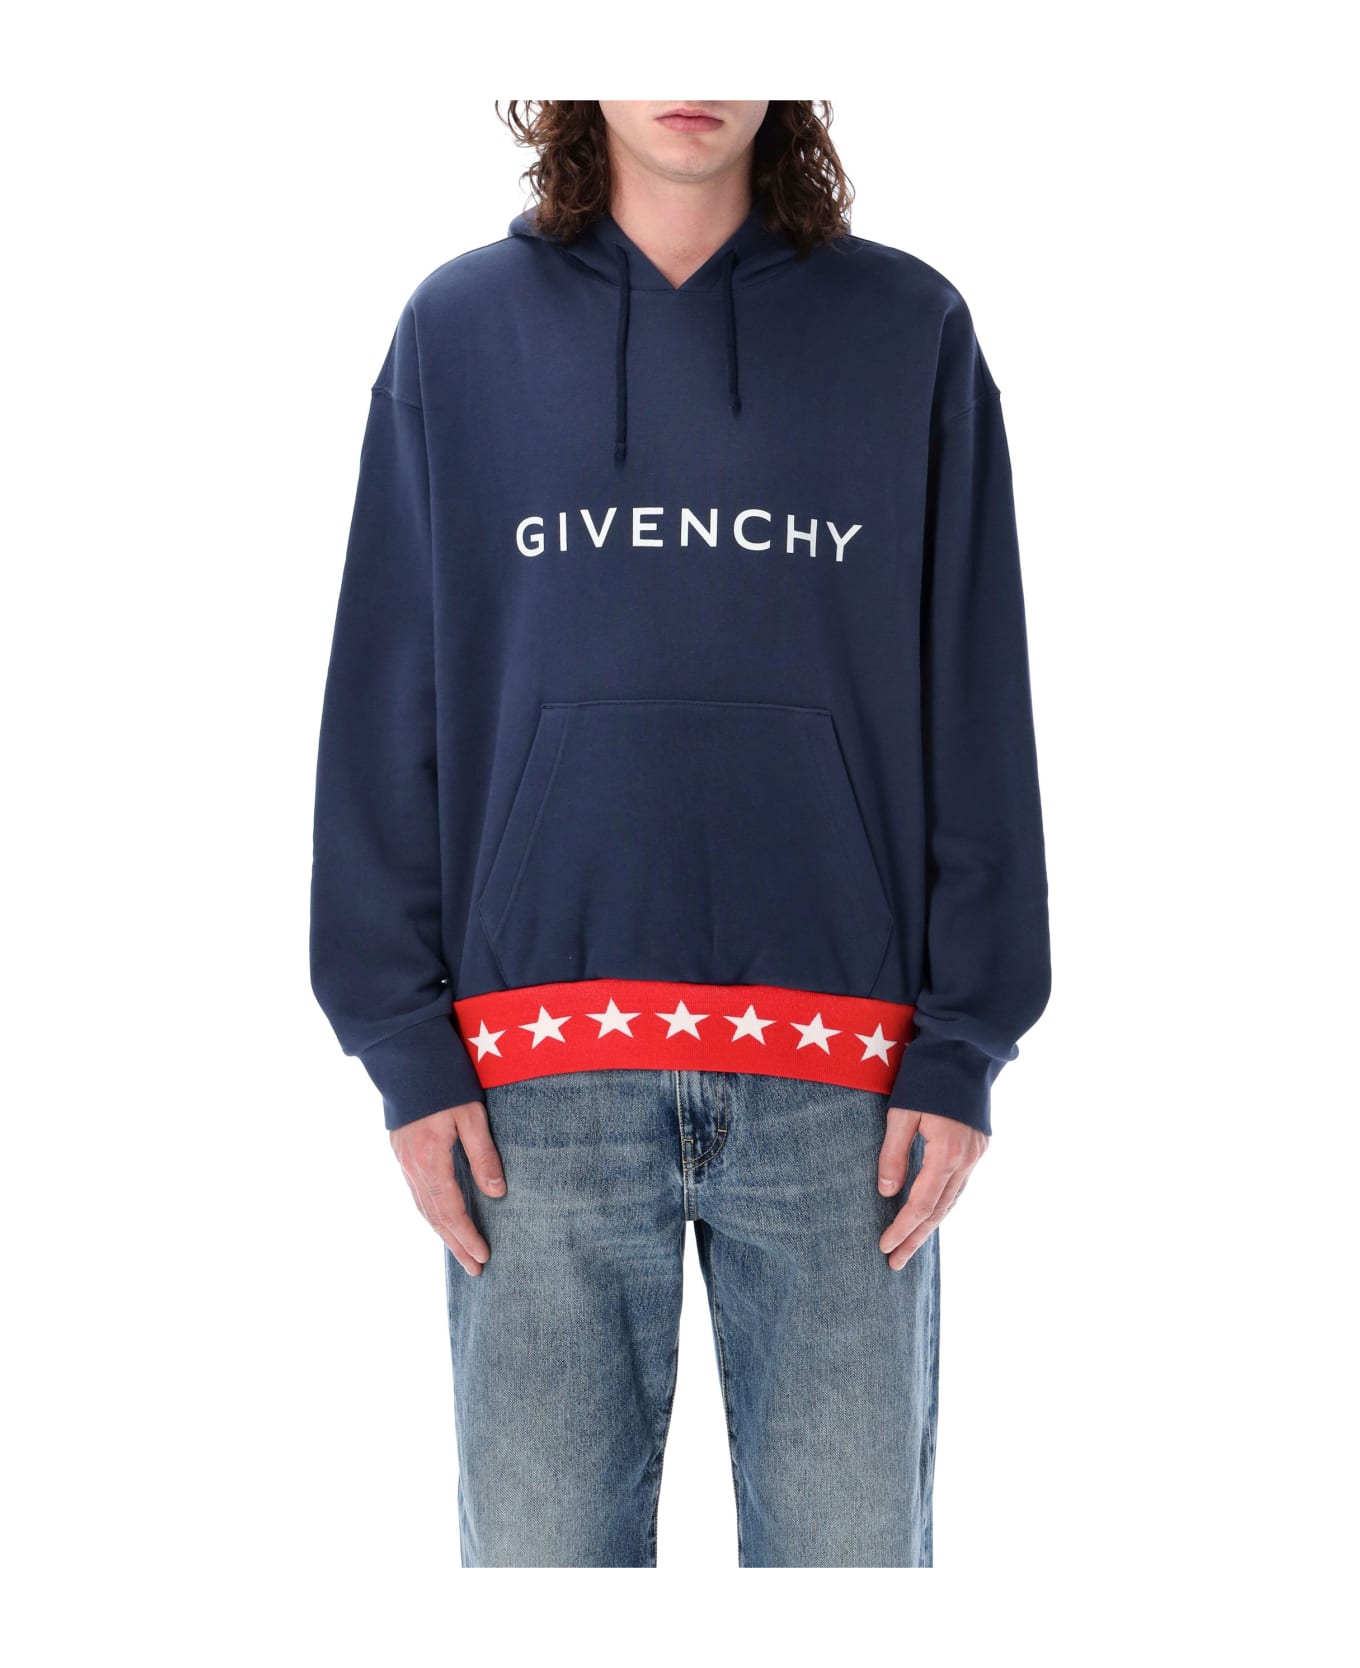 Givenchy Boxy Fit Hoodie With Pocket - DEEP BLUE